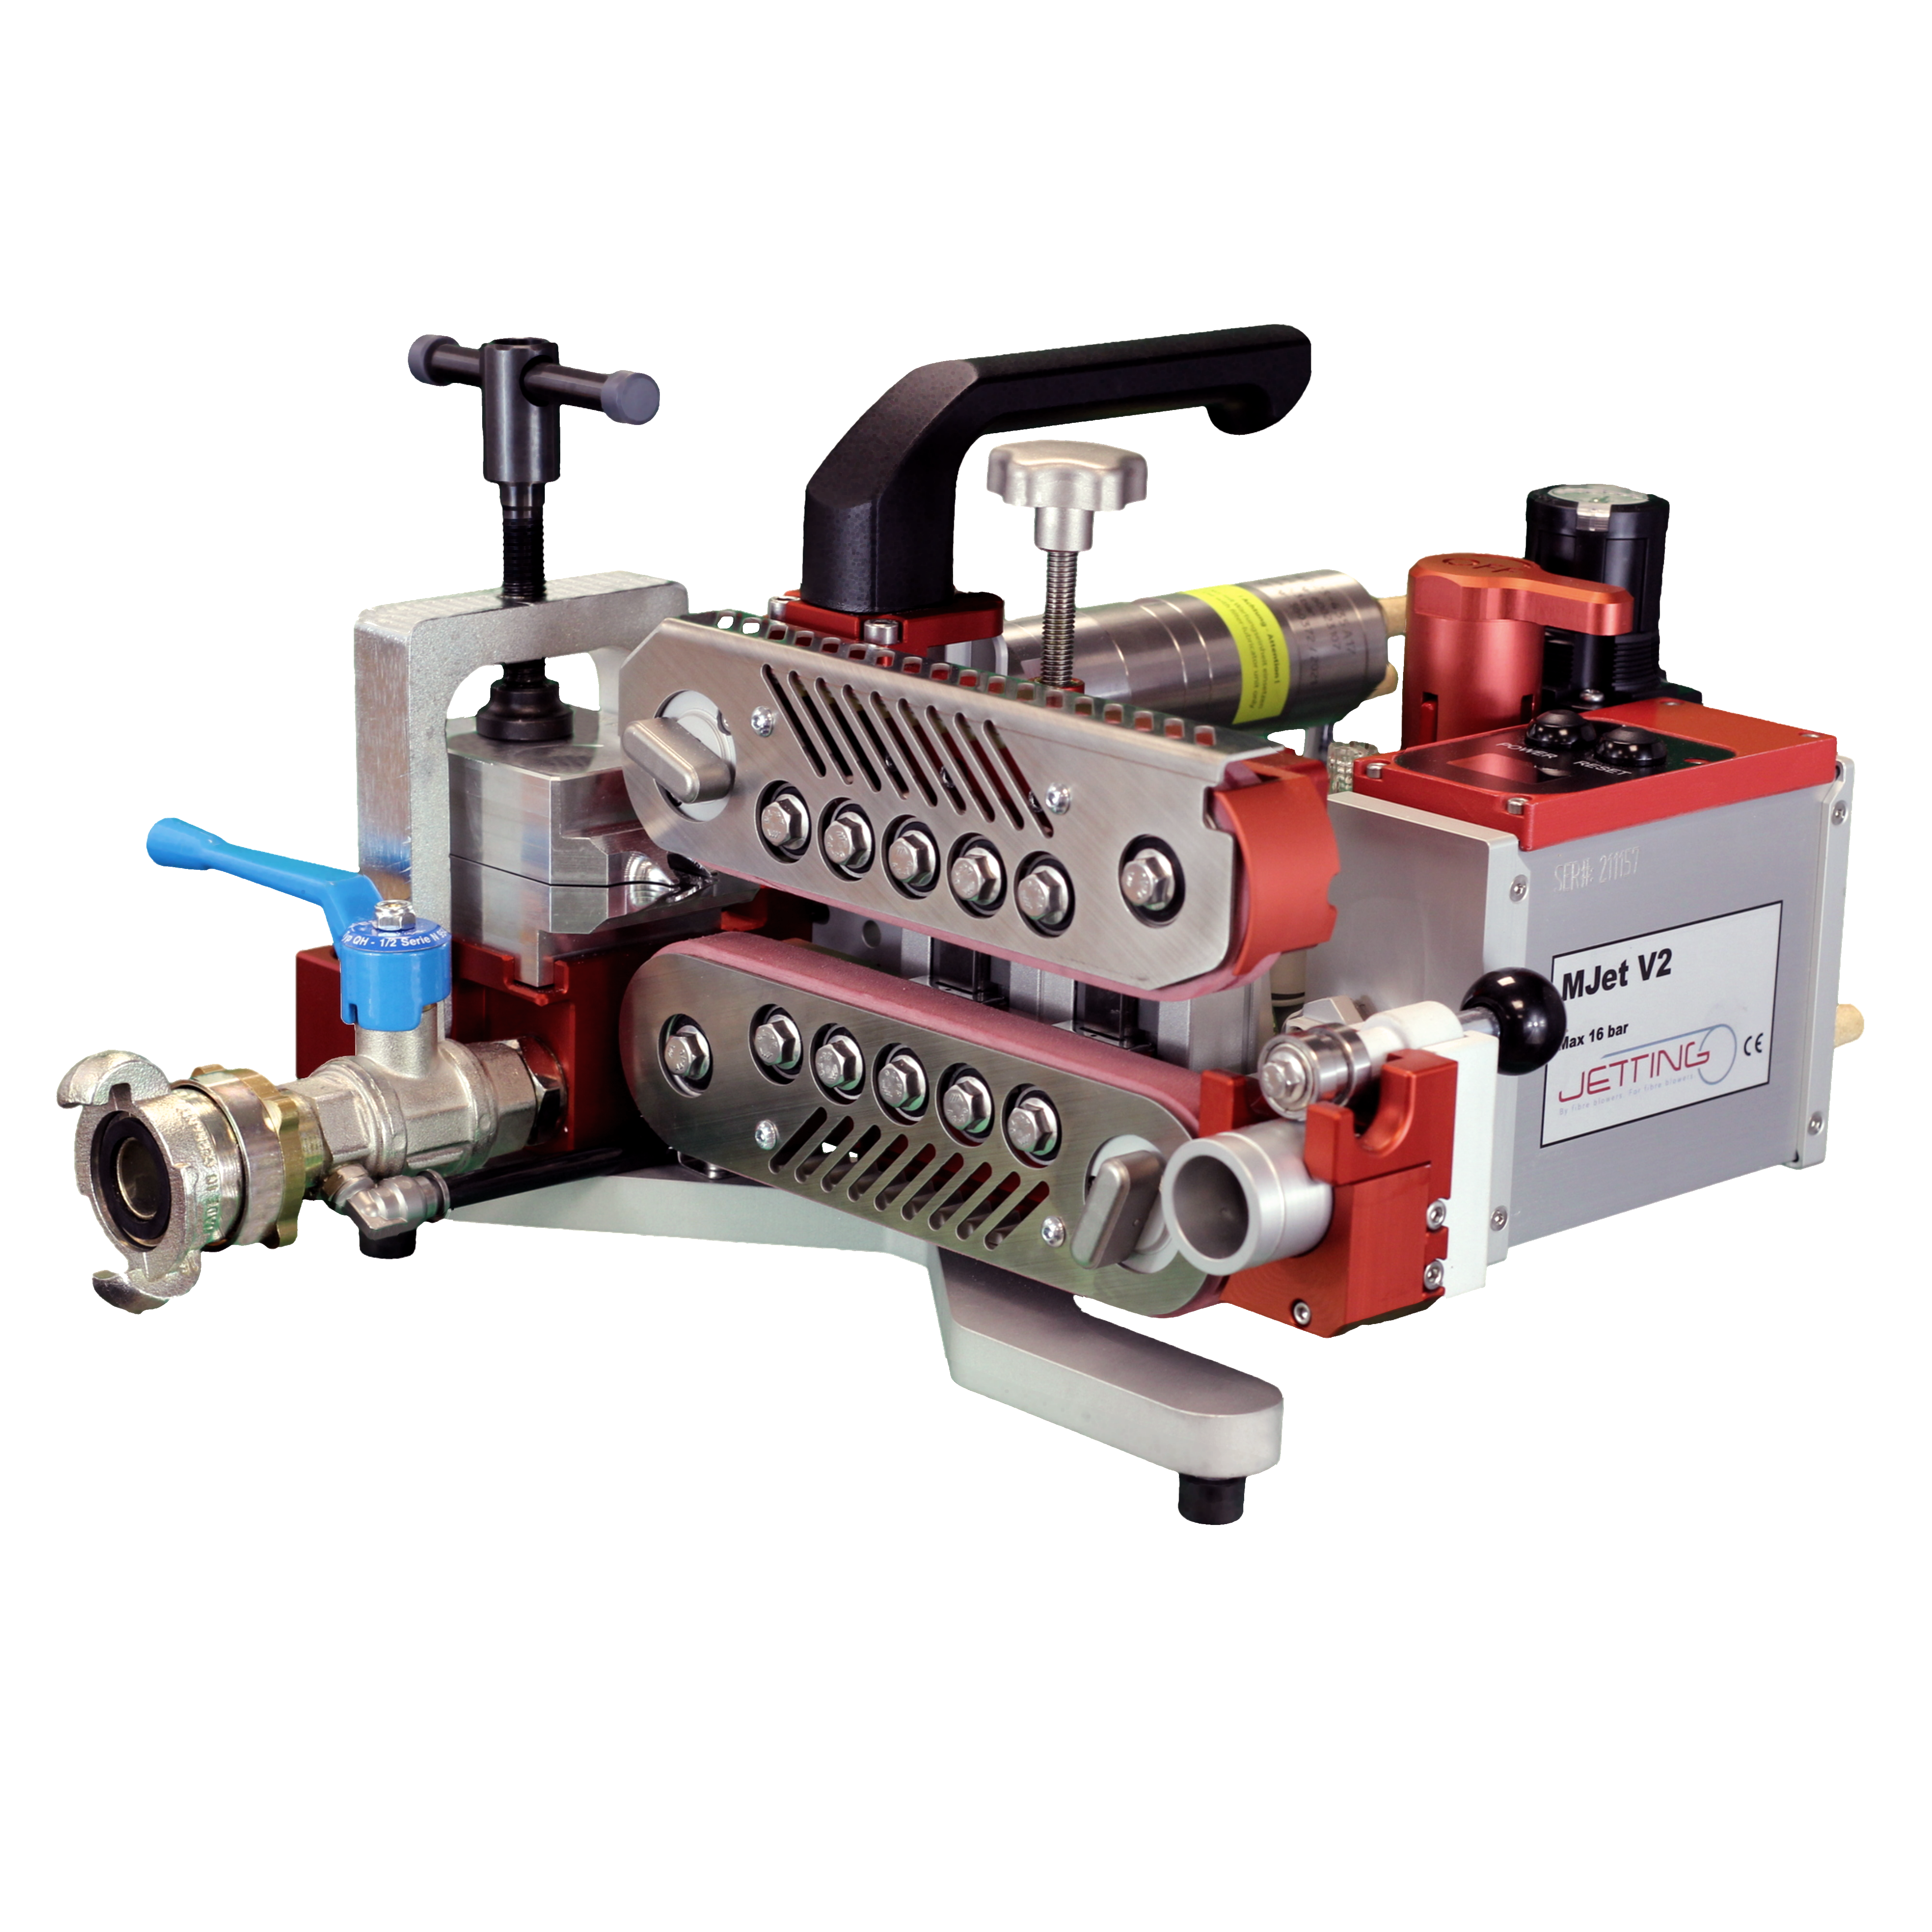 V2 fiber blowing machine for cable Ø 2,4-16mm and duct Ø 7-50mm, prepared for JetLogger